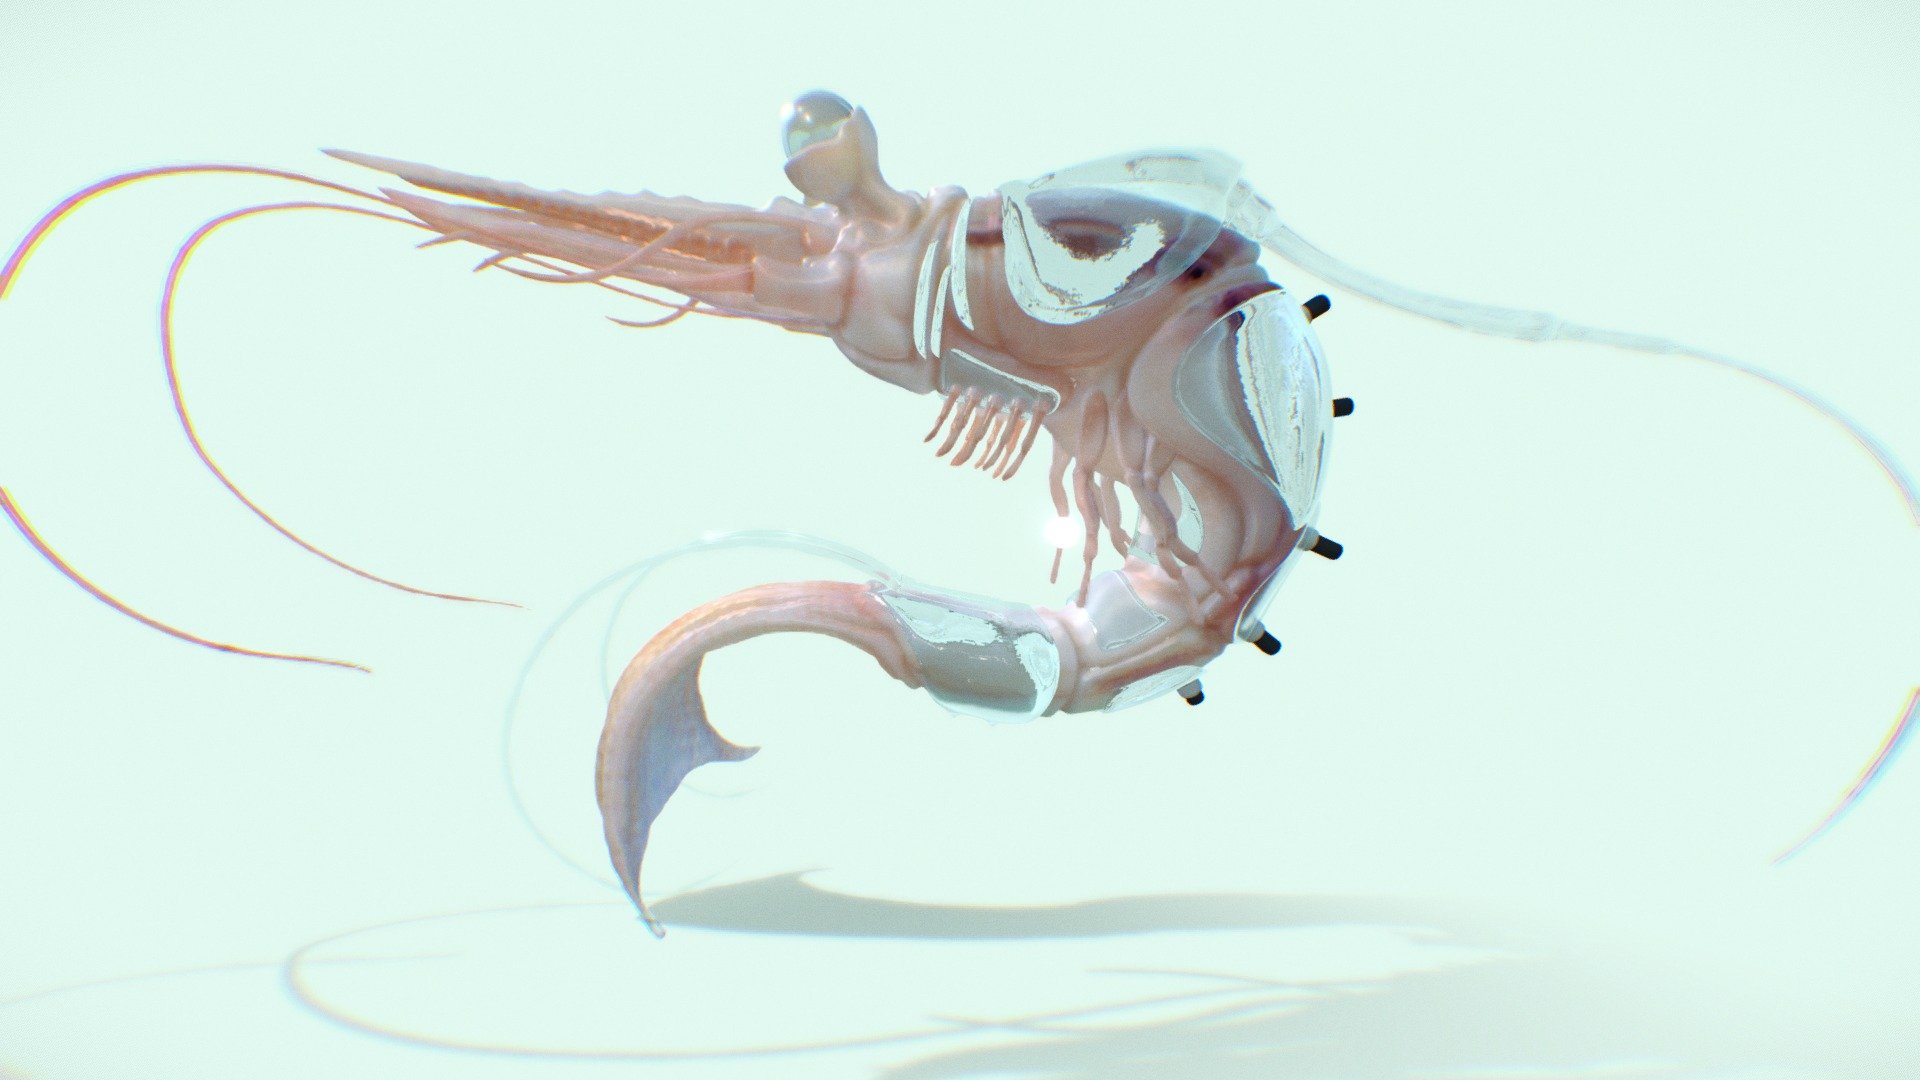 Xenomorph shrimp. A special seafood for all lovers of new diseases..
Not really a new gen, it's just using plastics as armor 3d model